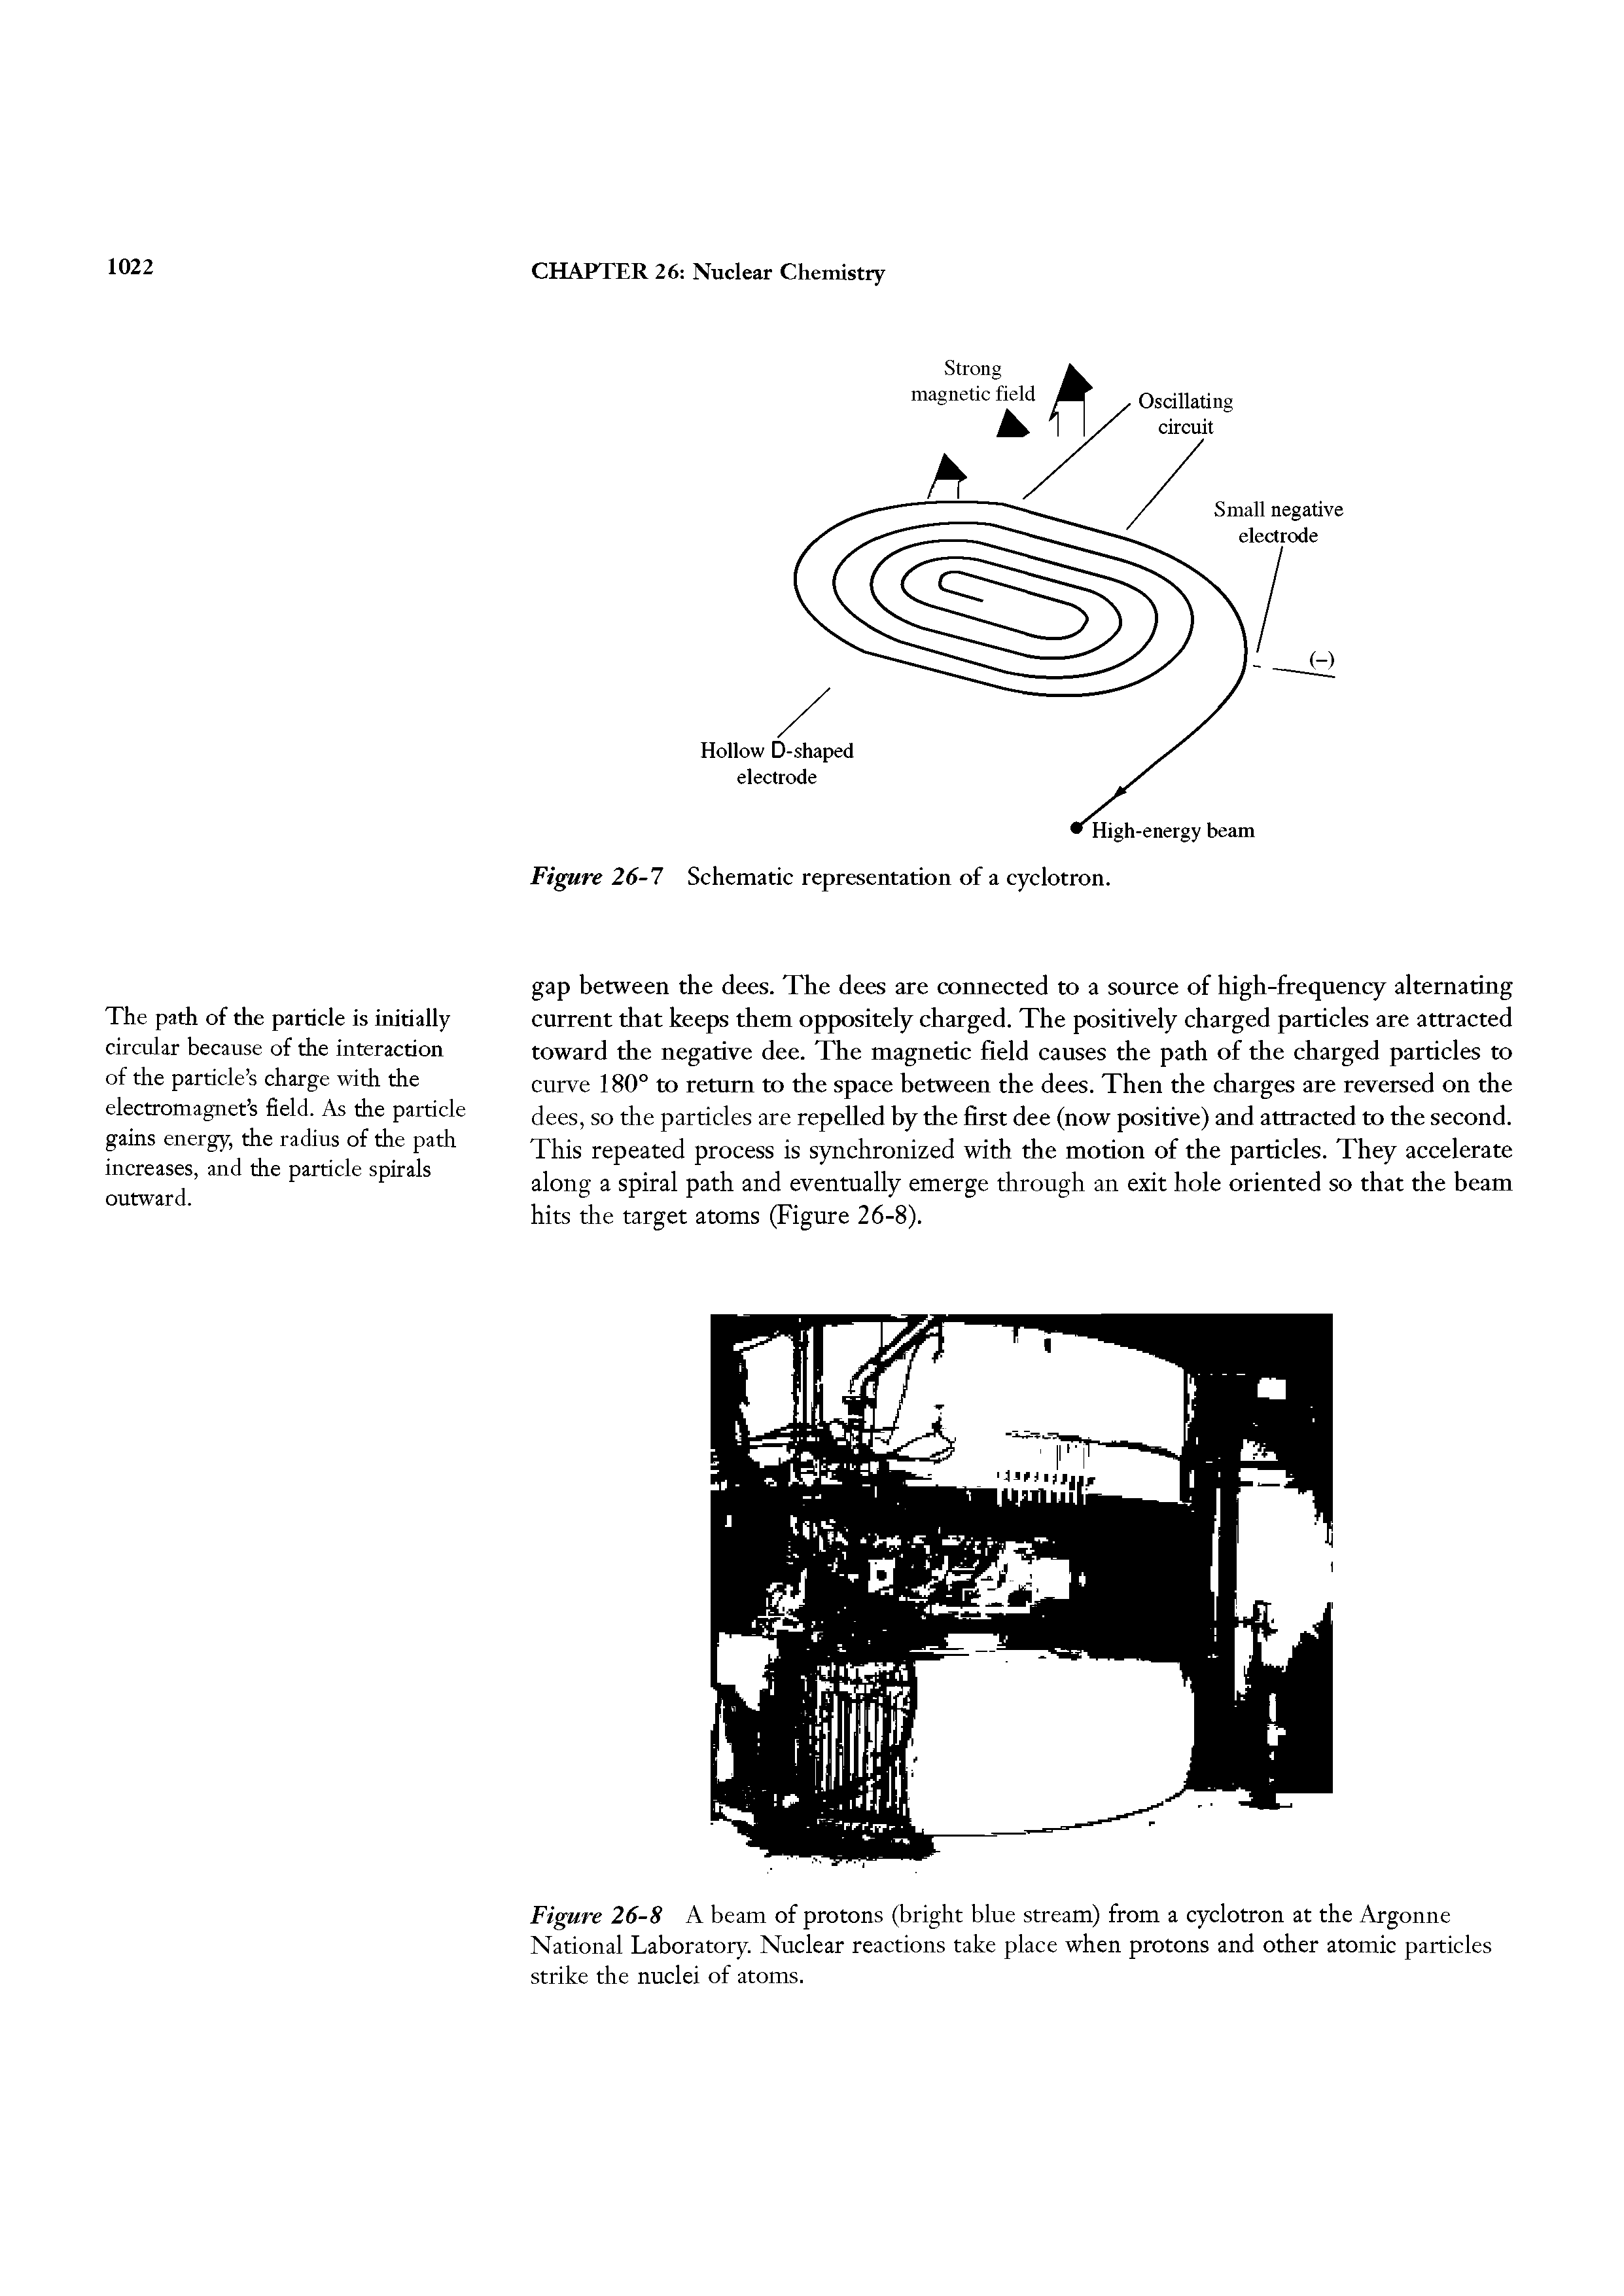 Figure 26-8 A beam of protons (bright blue stream) from a cyclotron at the Argonne National Laboratory. Nuclear reactions take place when protons and other atomic particles strike the nuclei of atoms.